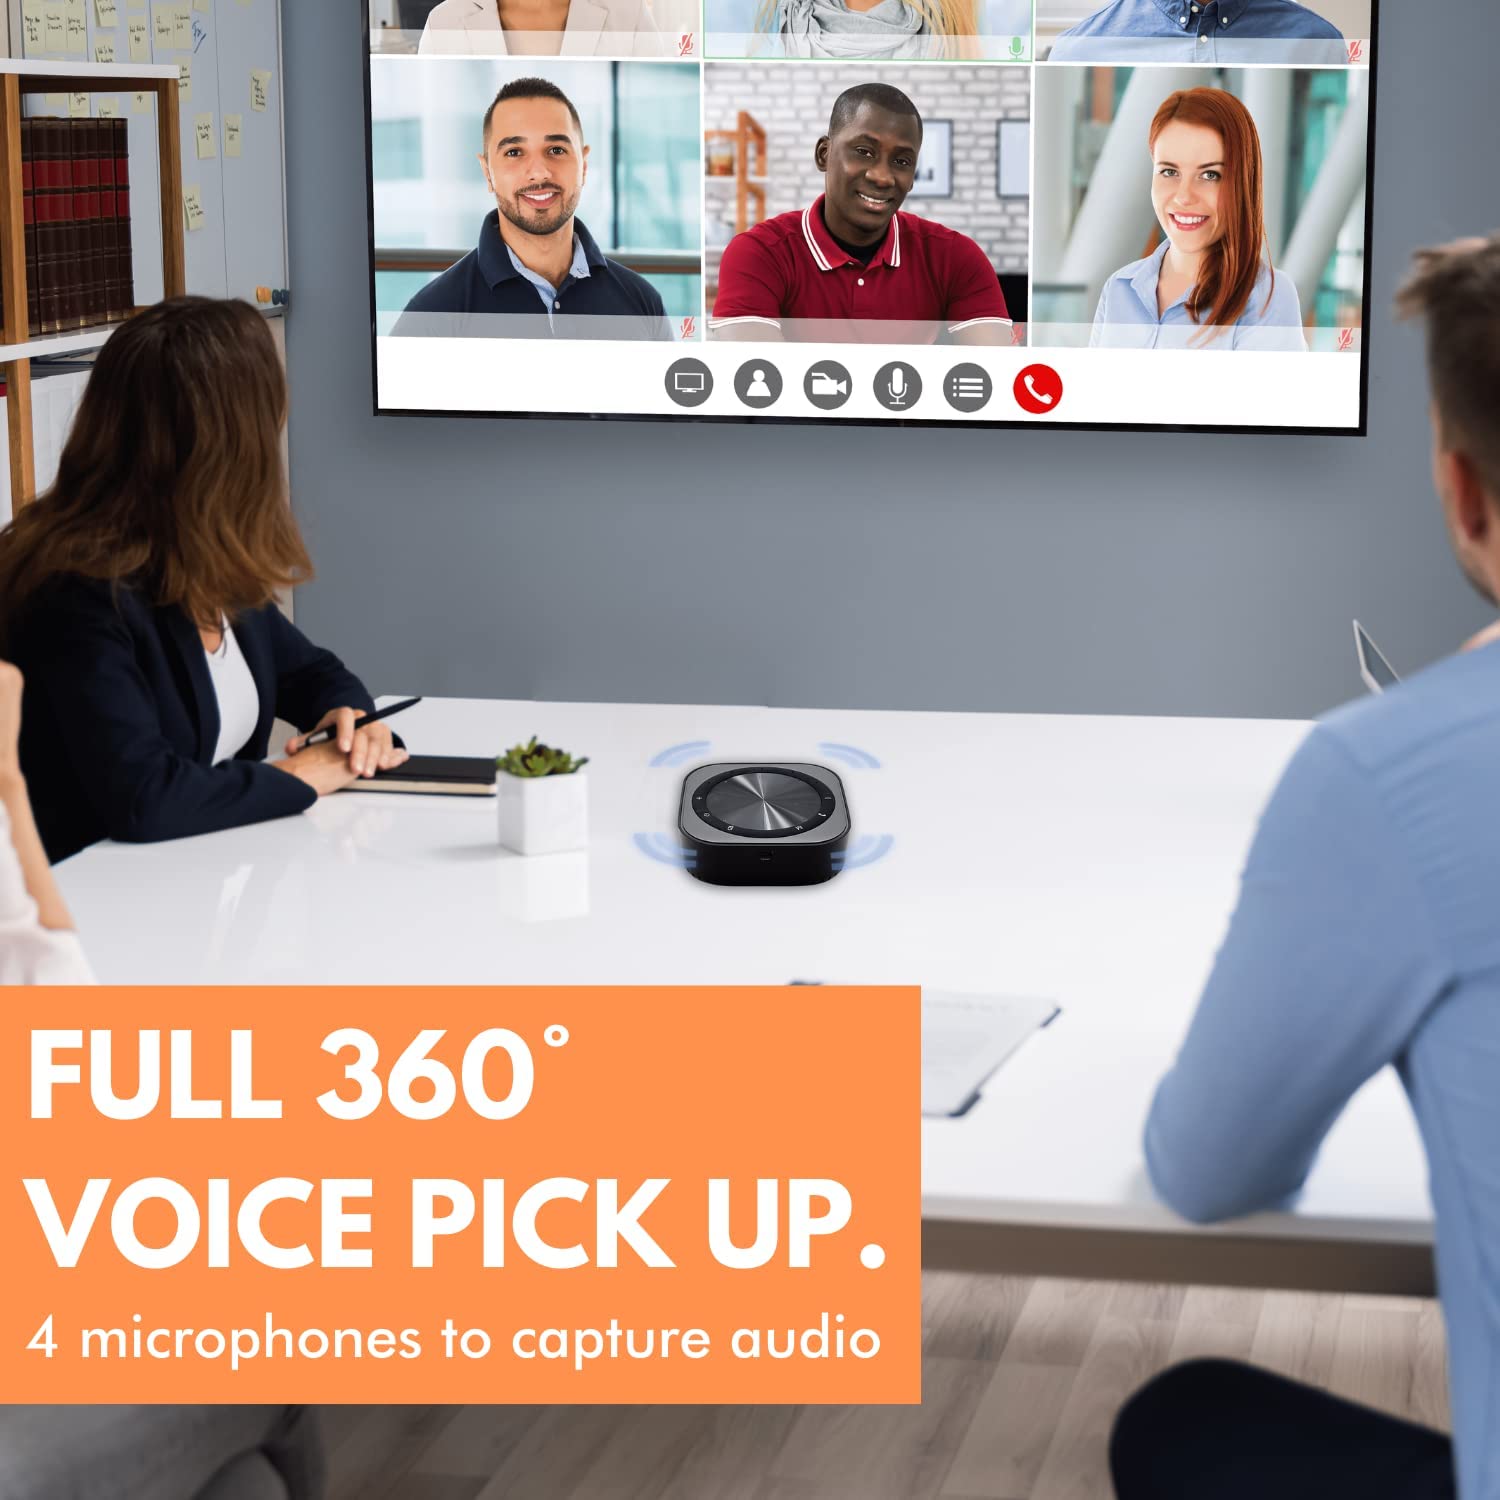 Performance Bluetooth Speakerphone for Conference Calls